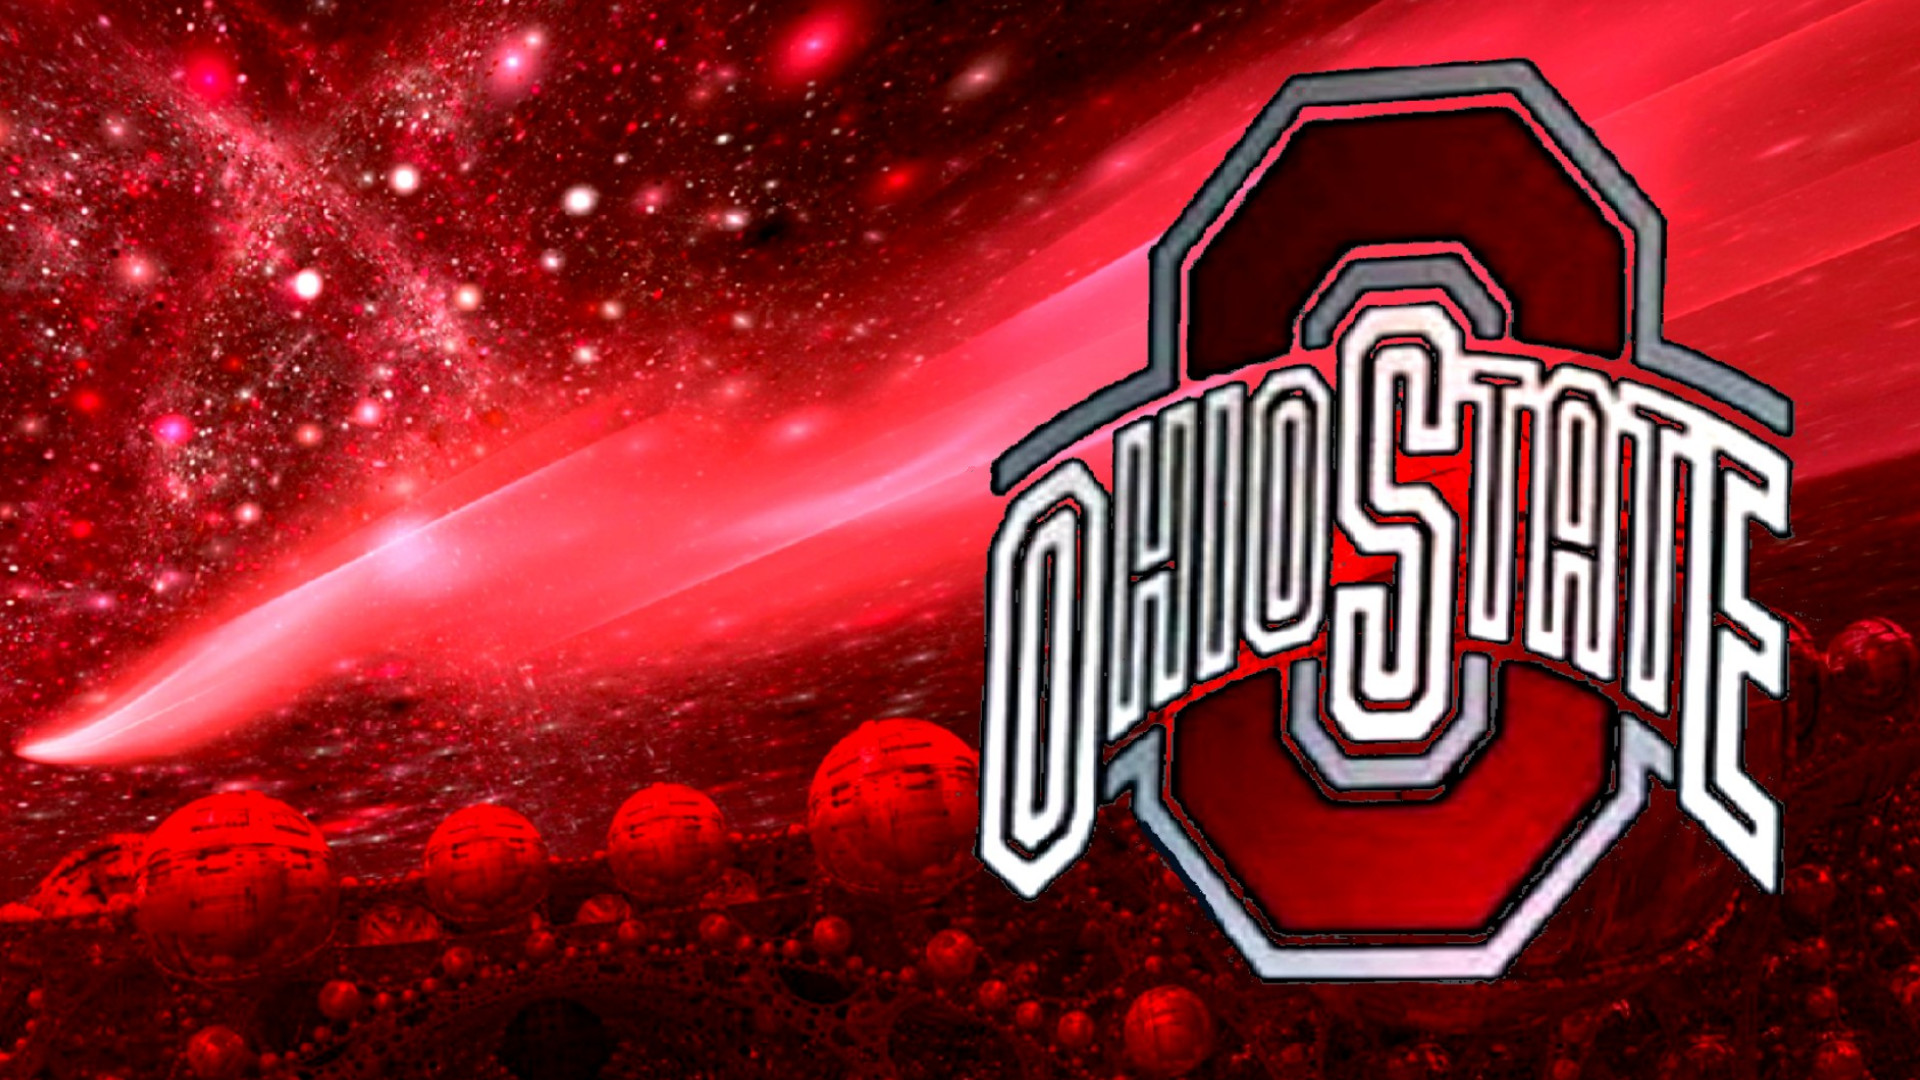 1920x1080 ... backgrounds for ohio state wallpaper backgrounds www ...